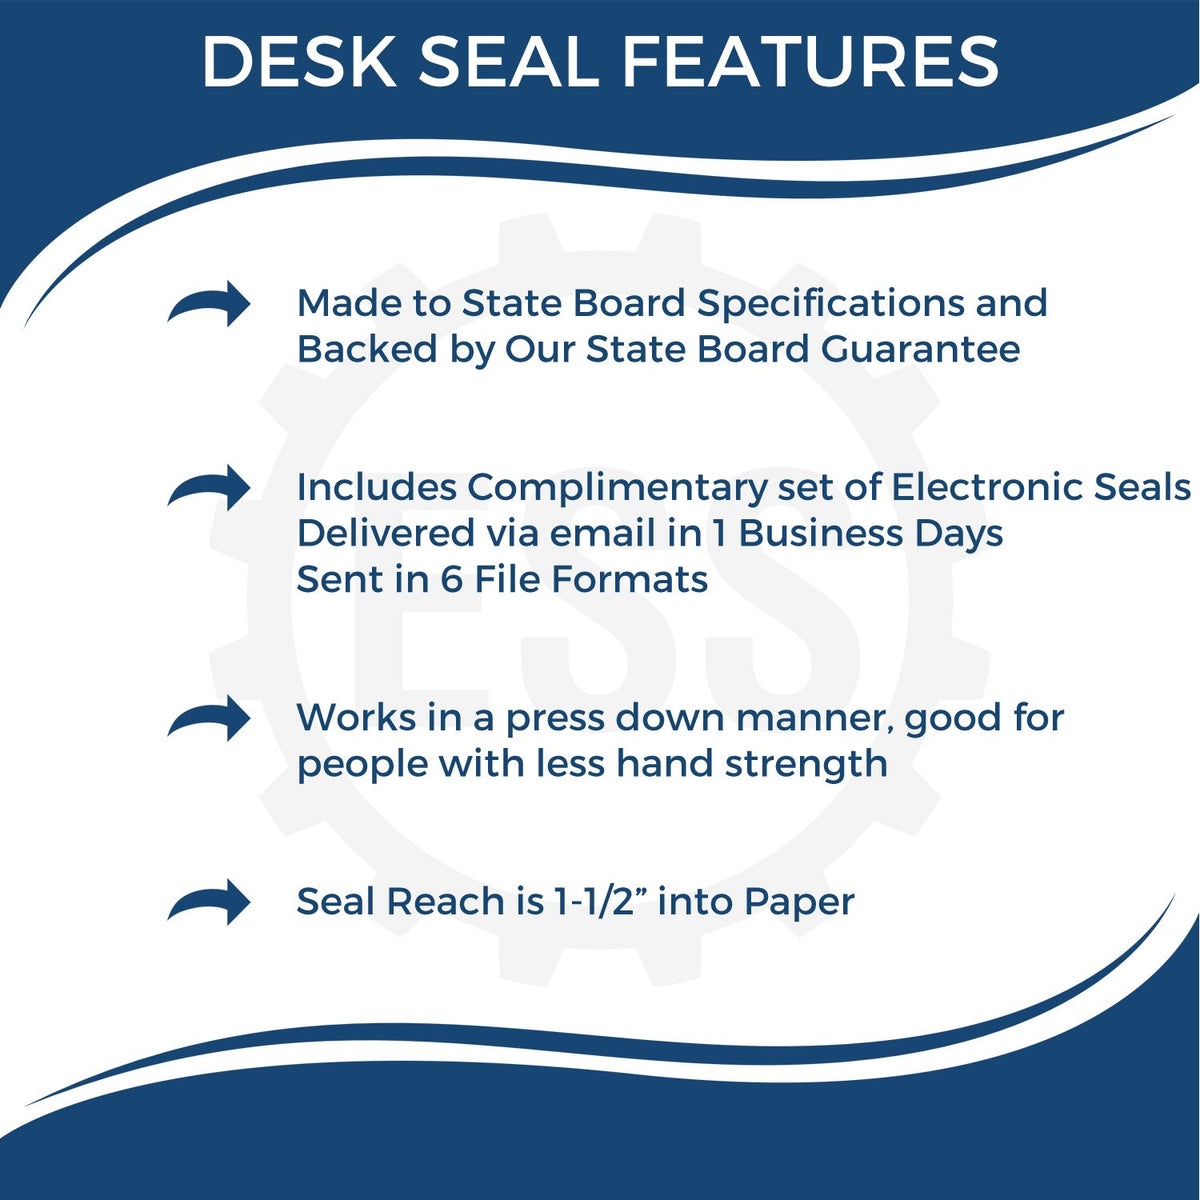 A picture of an infographic highlighting the selling points for the Indiana Desk Surveyor Seal Embosser